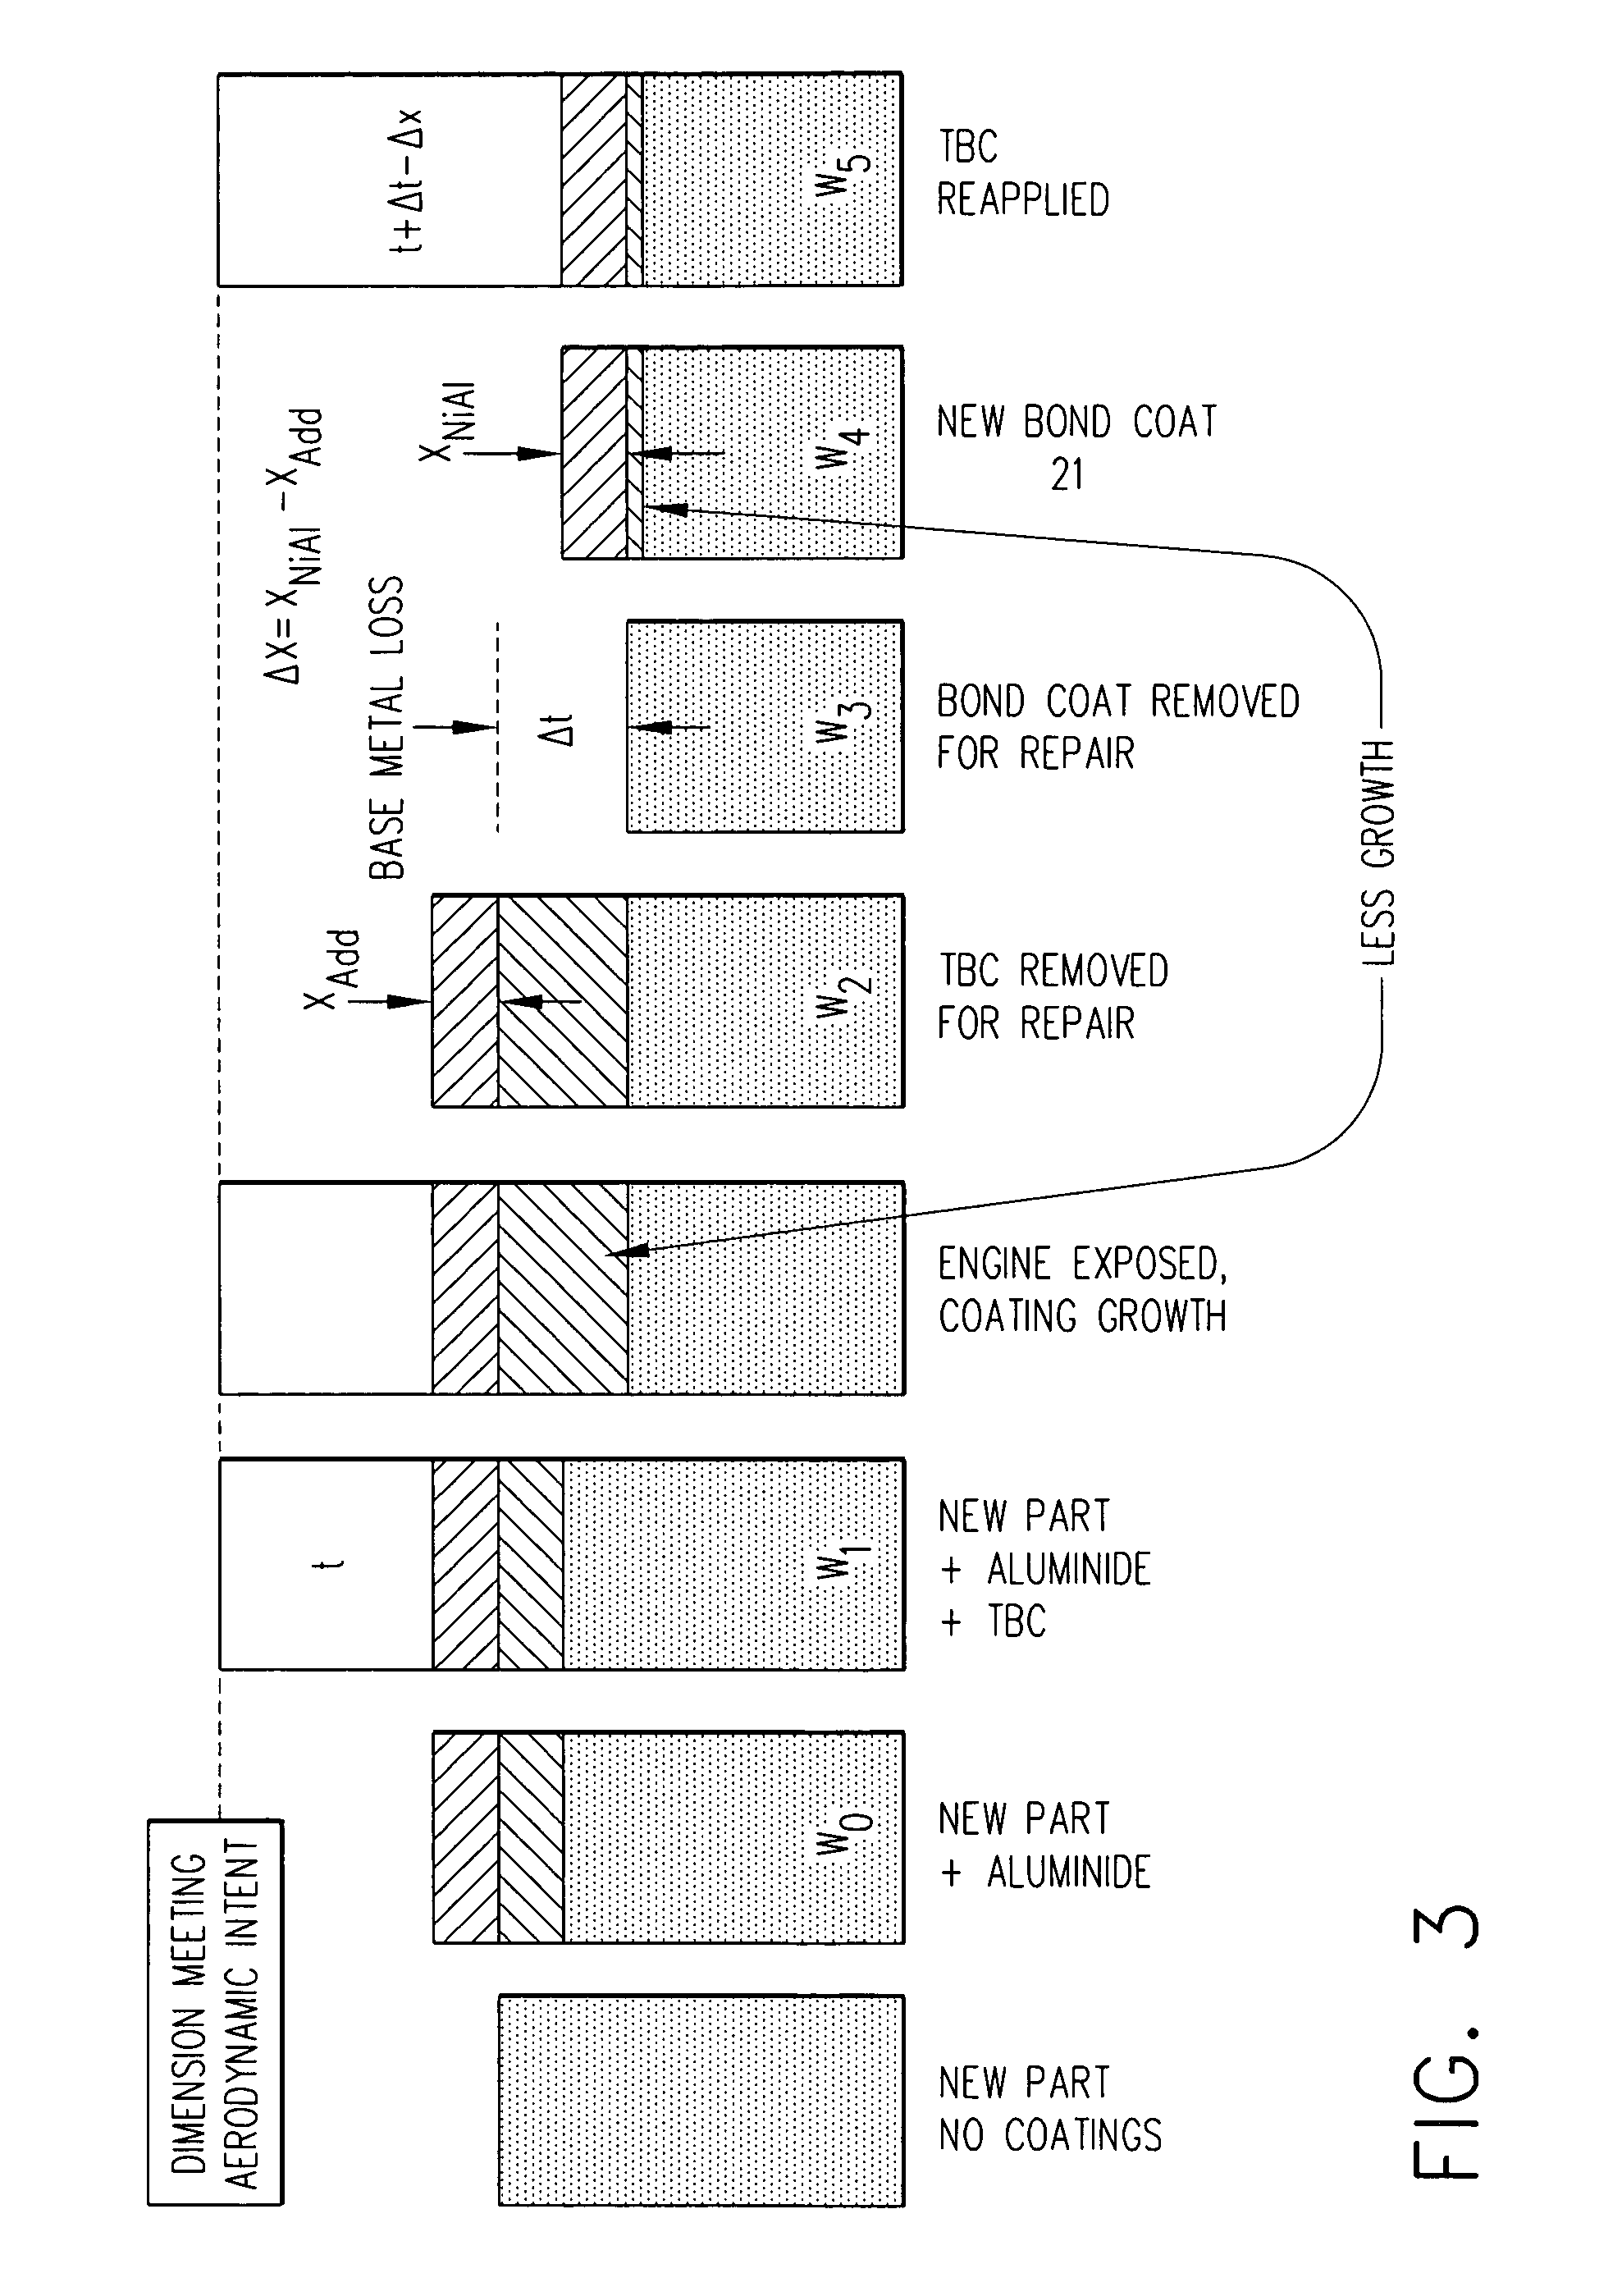 Method for repairing coated components using NiAl bond coats